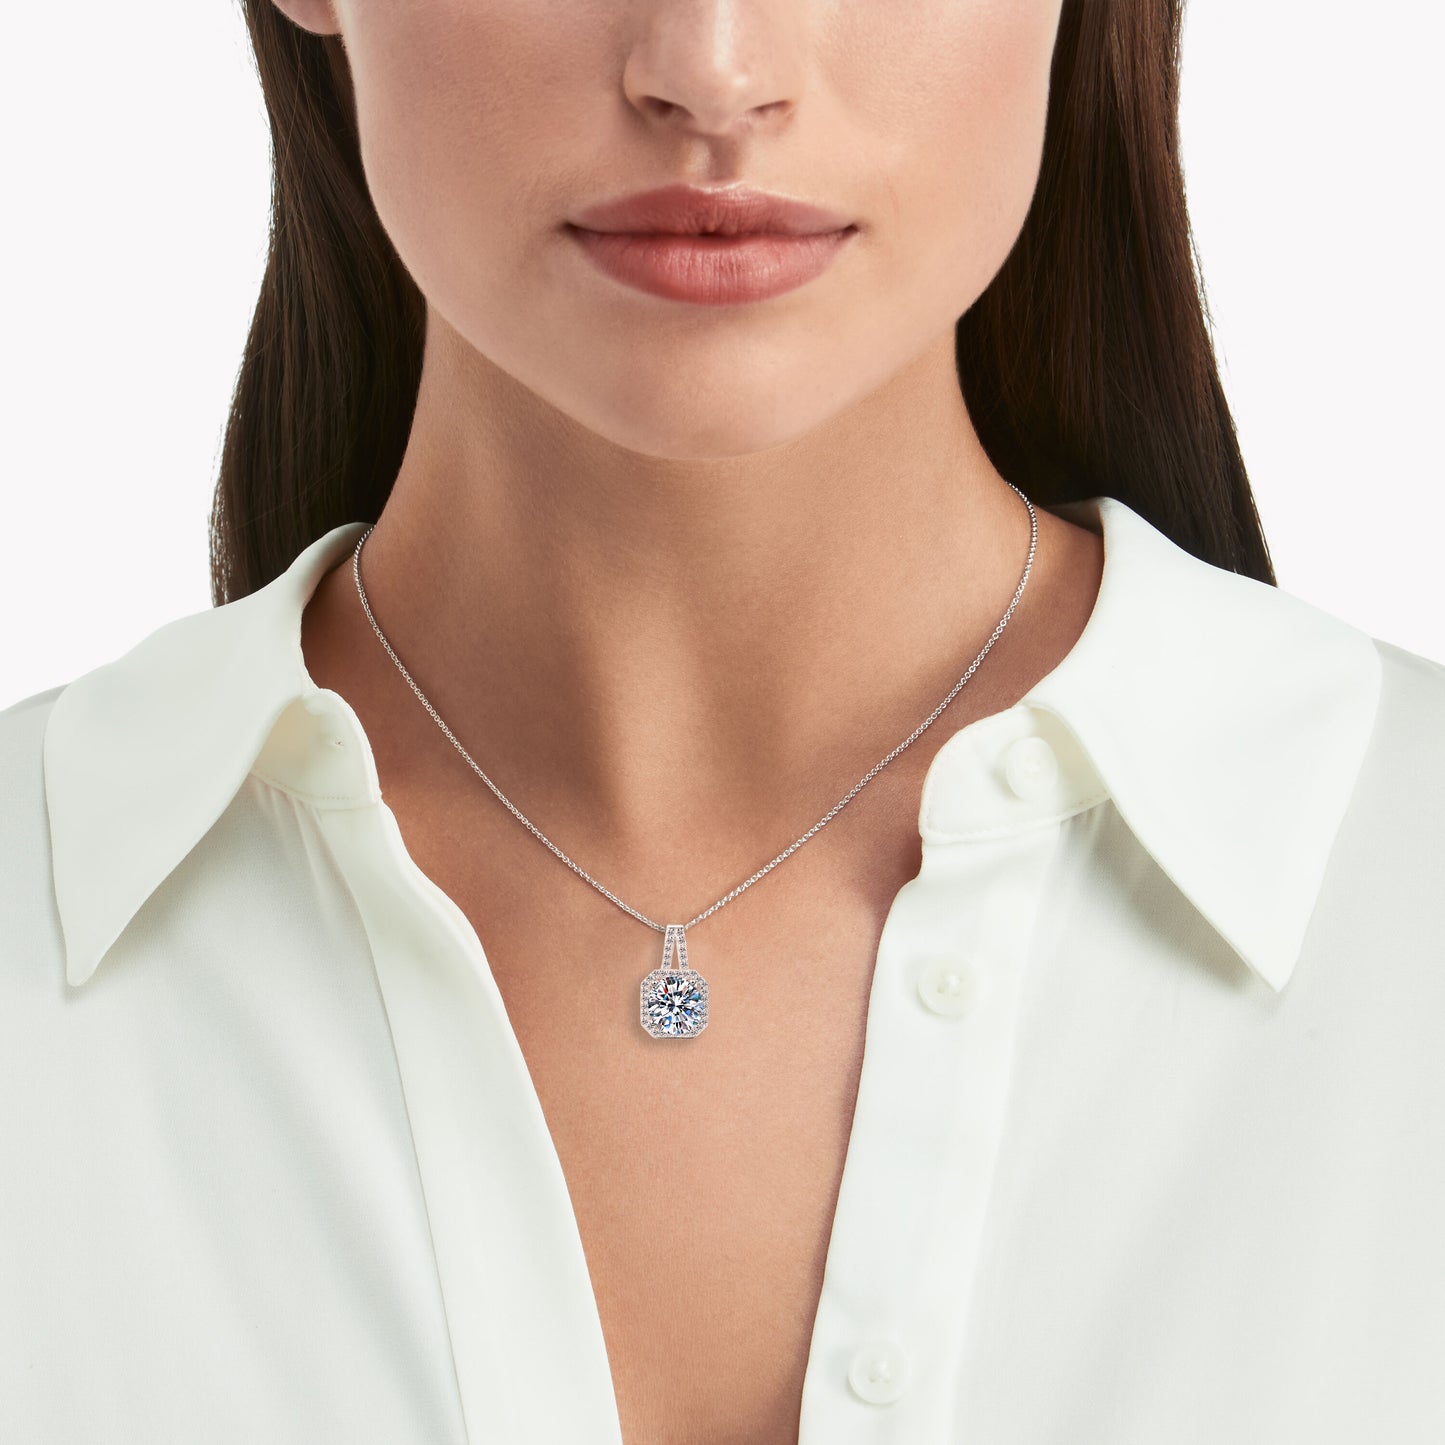 Eloise Diamond Necklace in White Gold